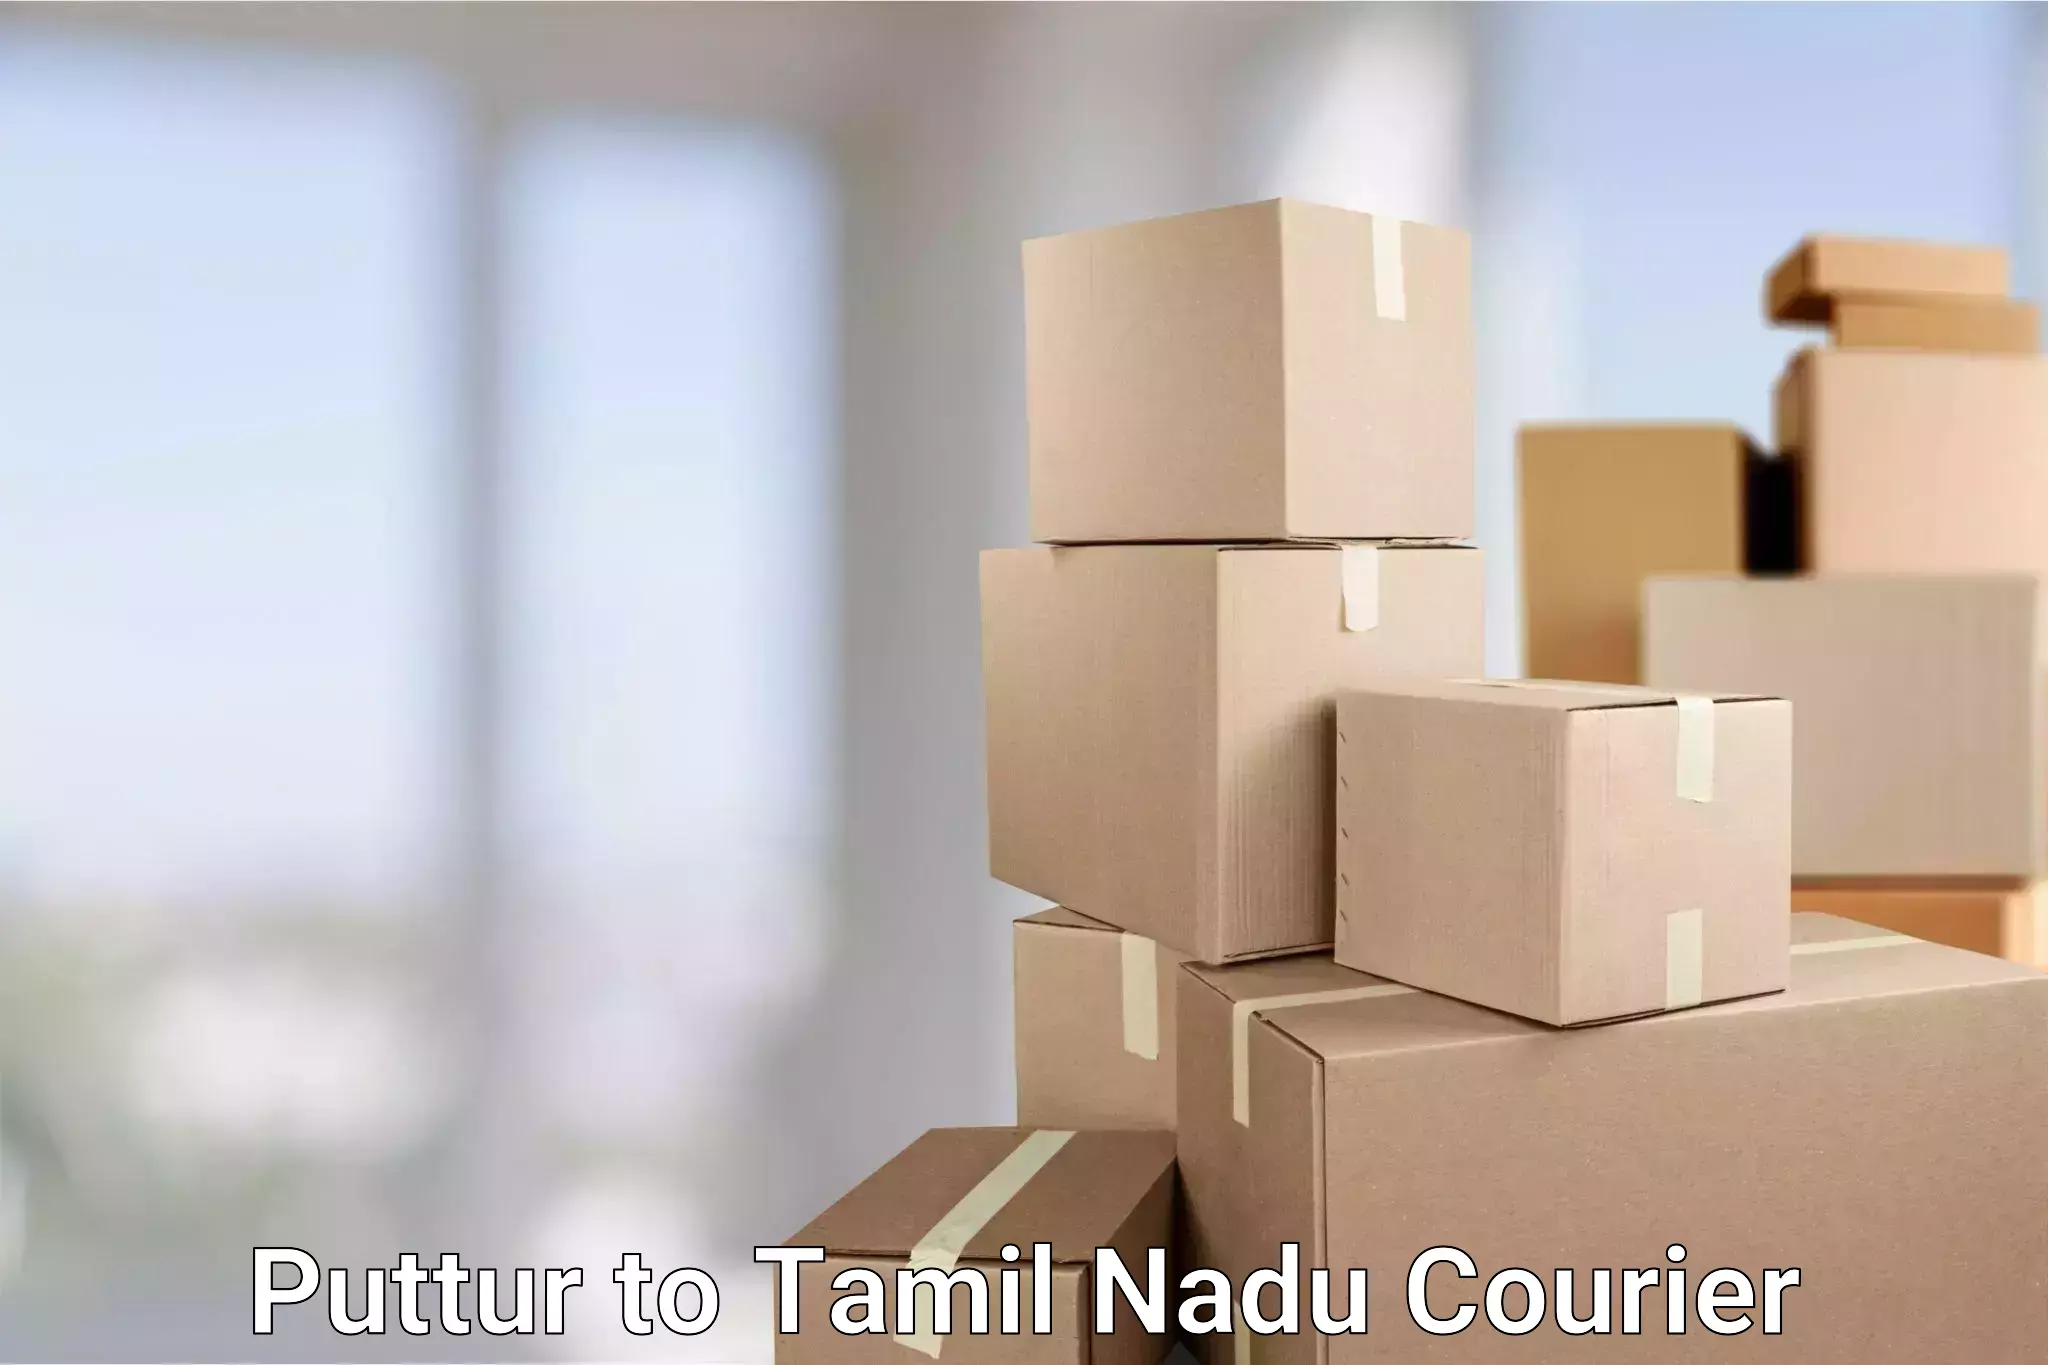 Courier service innovation Puttur to Aranthangi